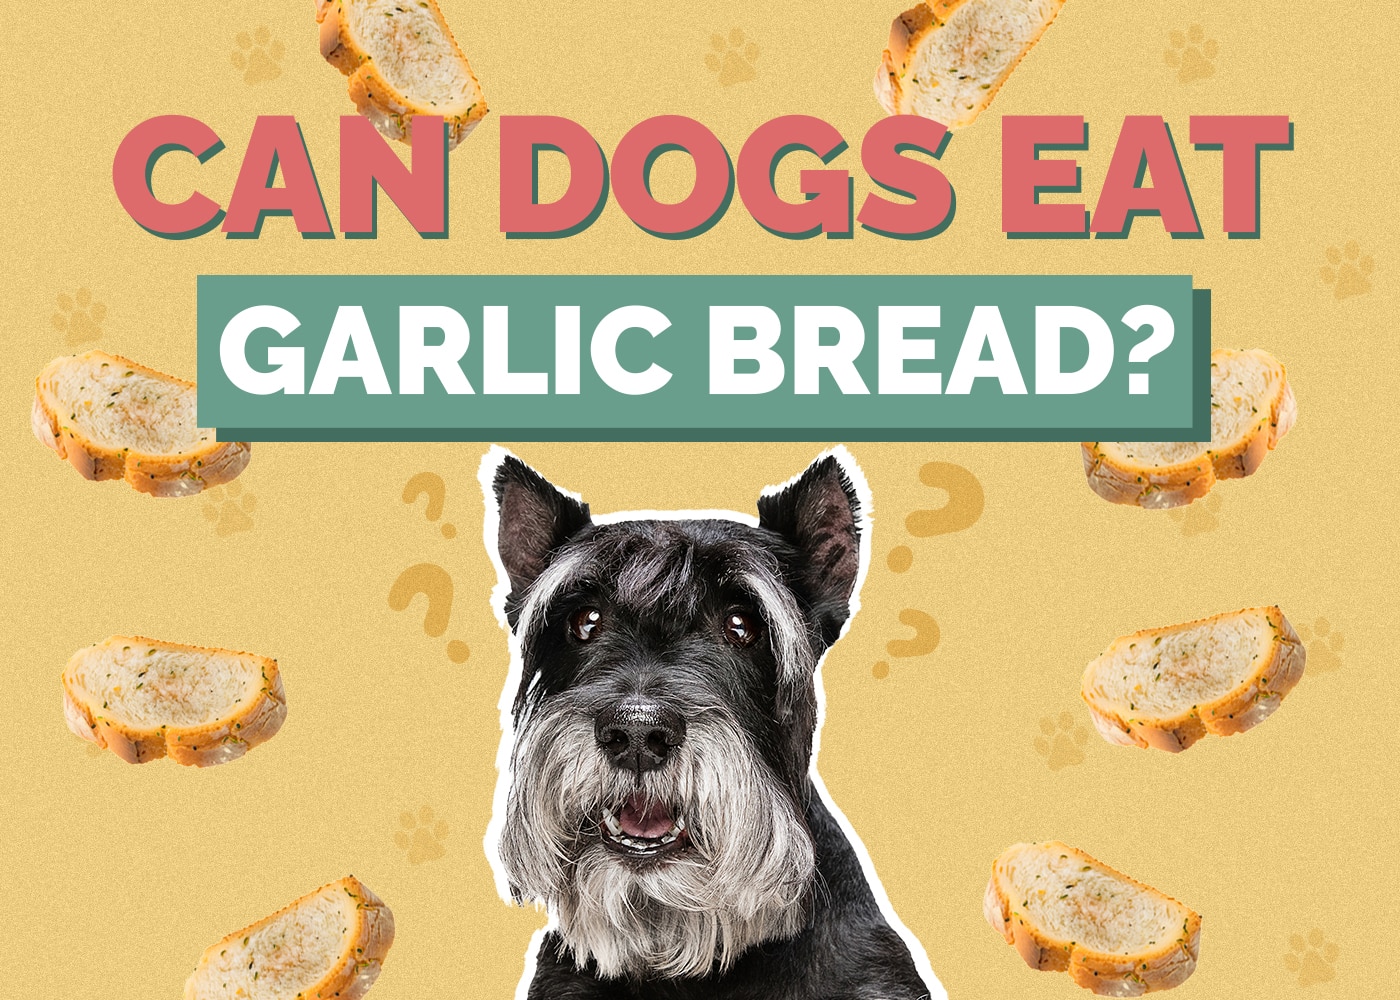 Can Dogs Eat garlic-bread